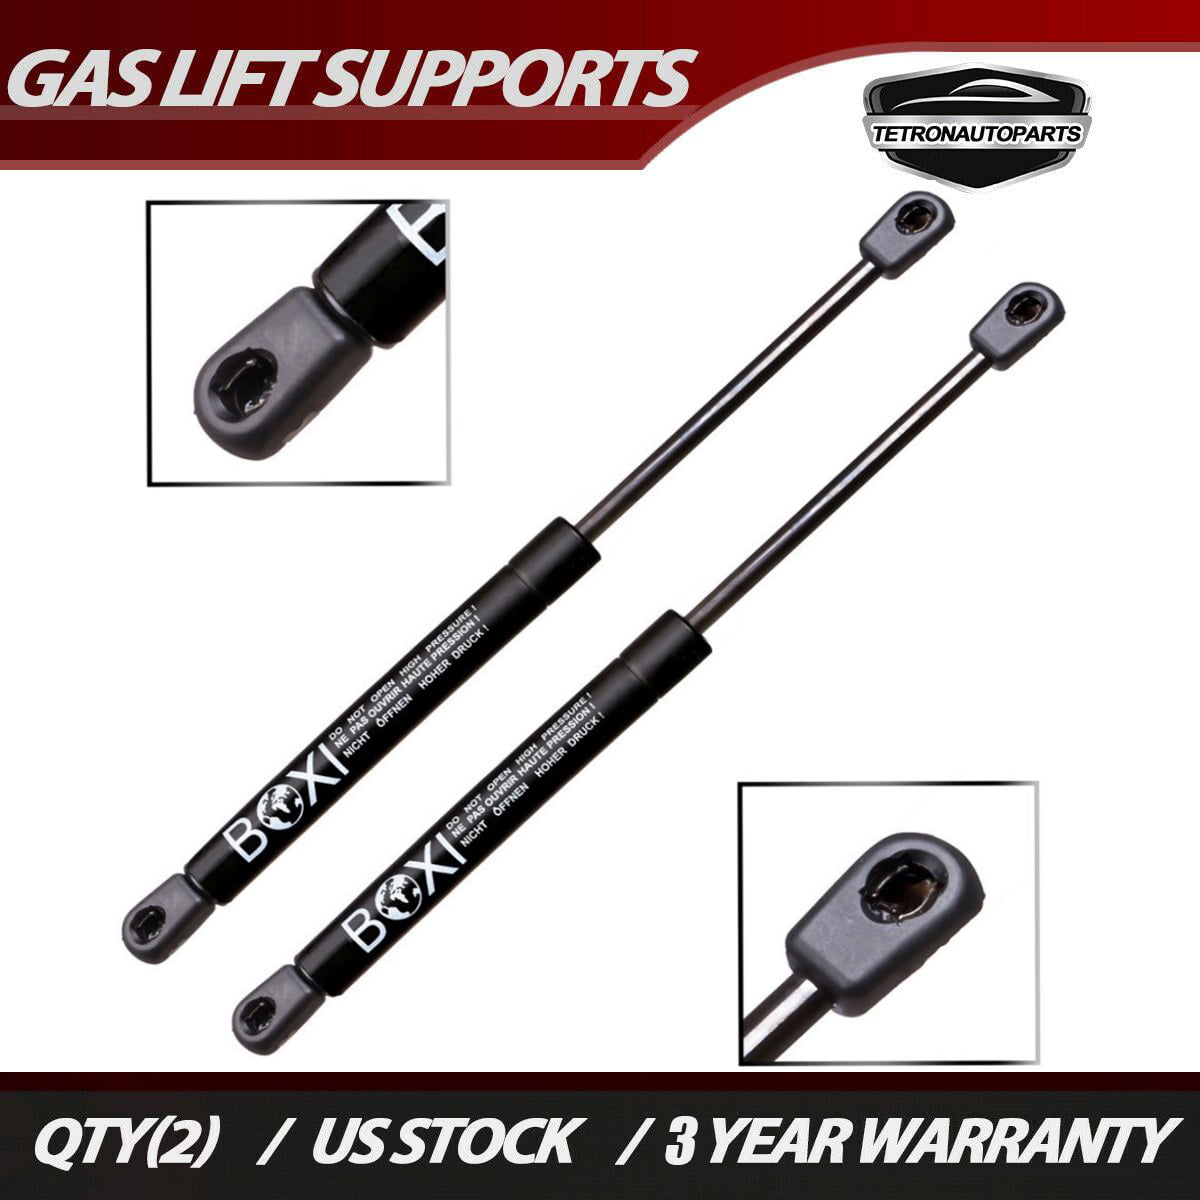 2Pcs Hood Lift Supports Springs Props Fit For Dodge Ram 1500 2500 3500 4500 5500 